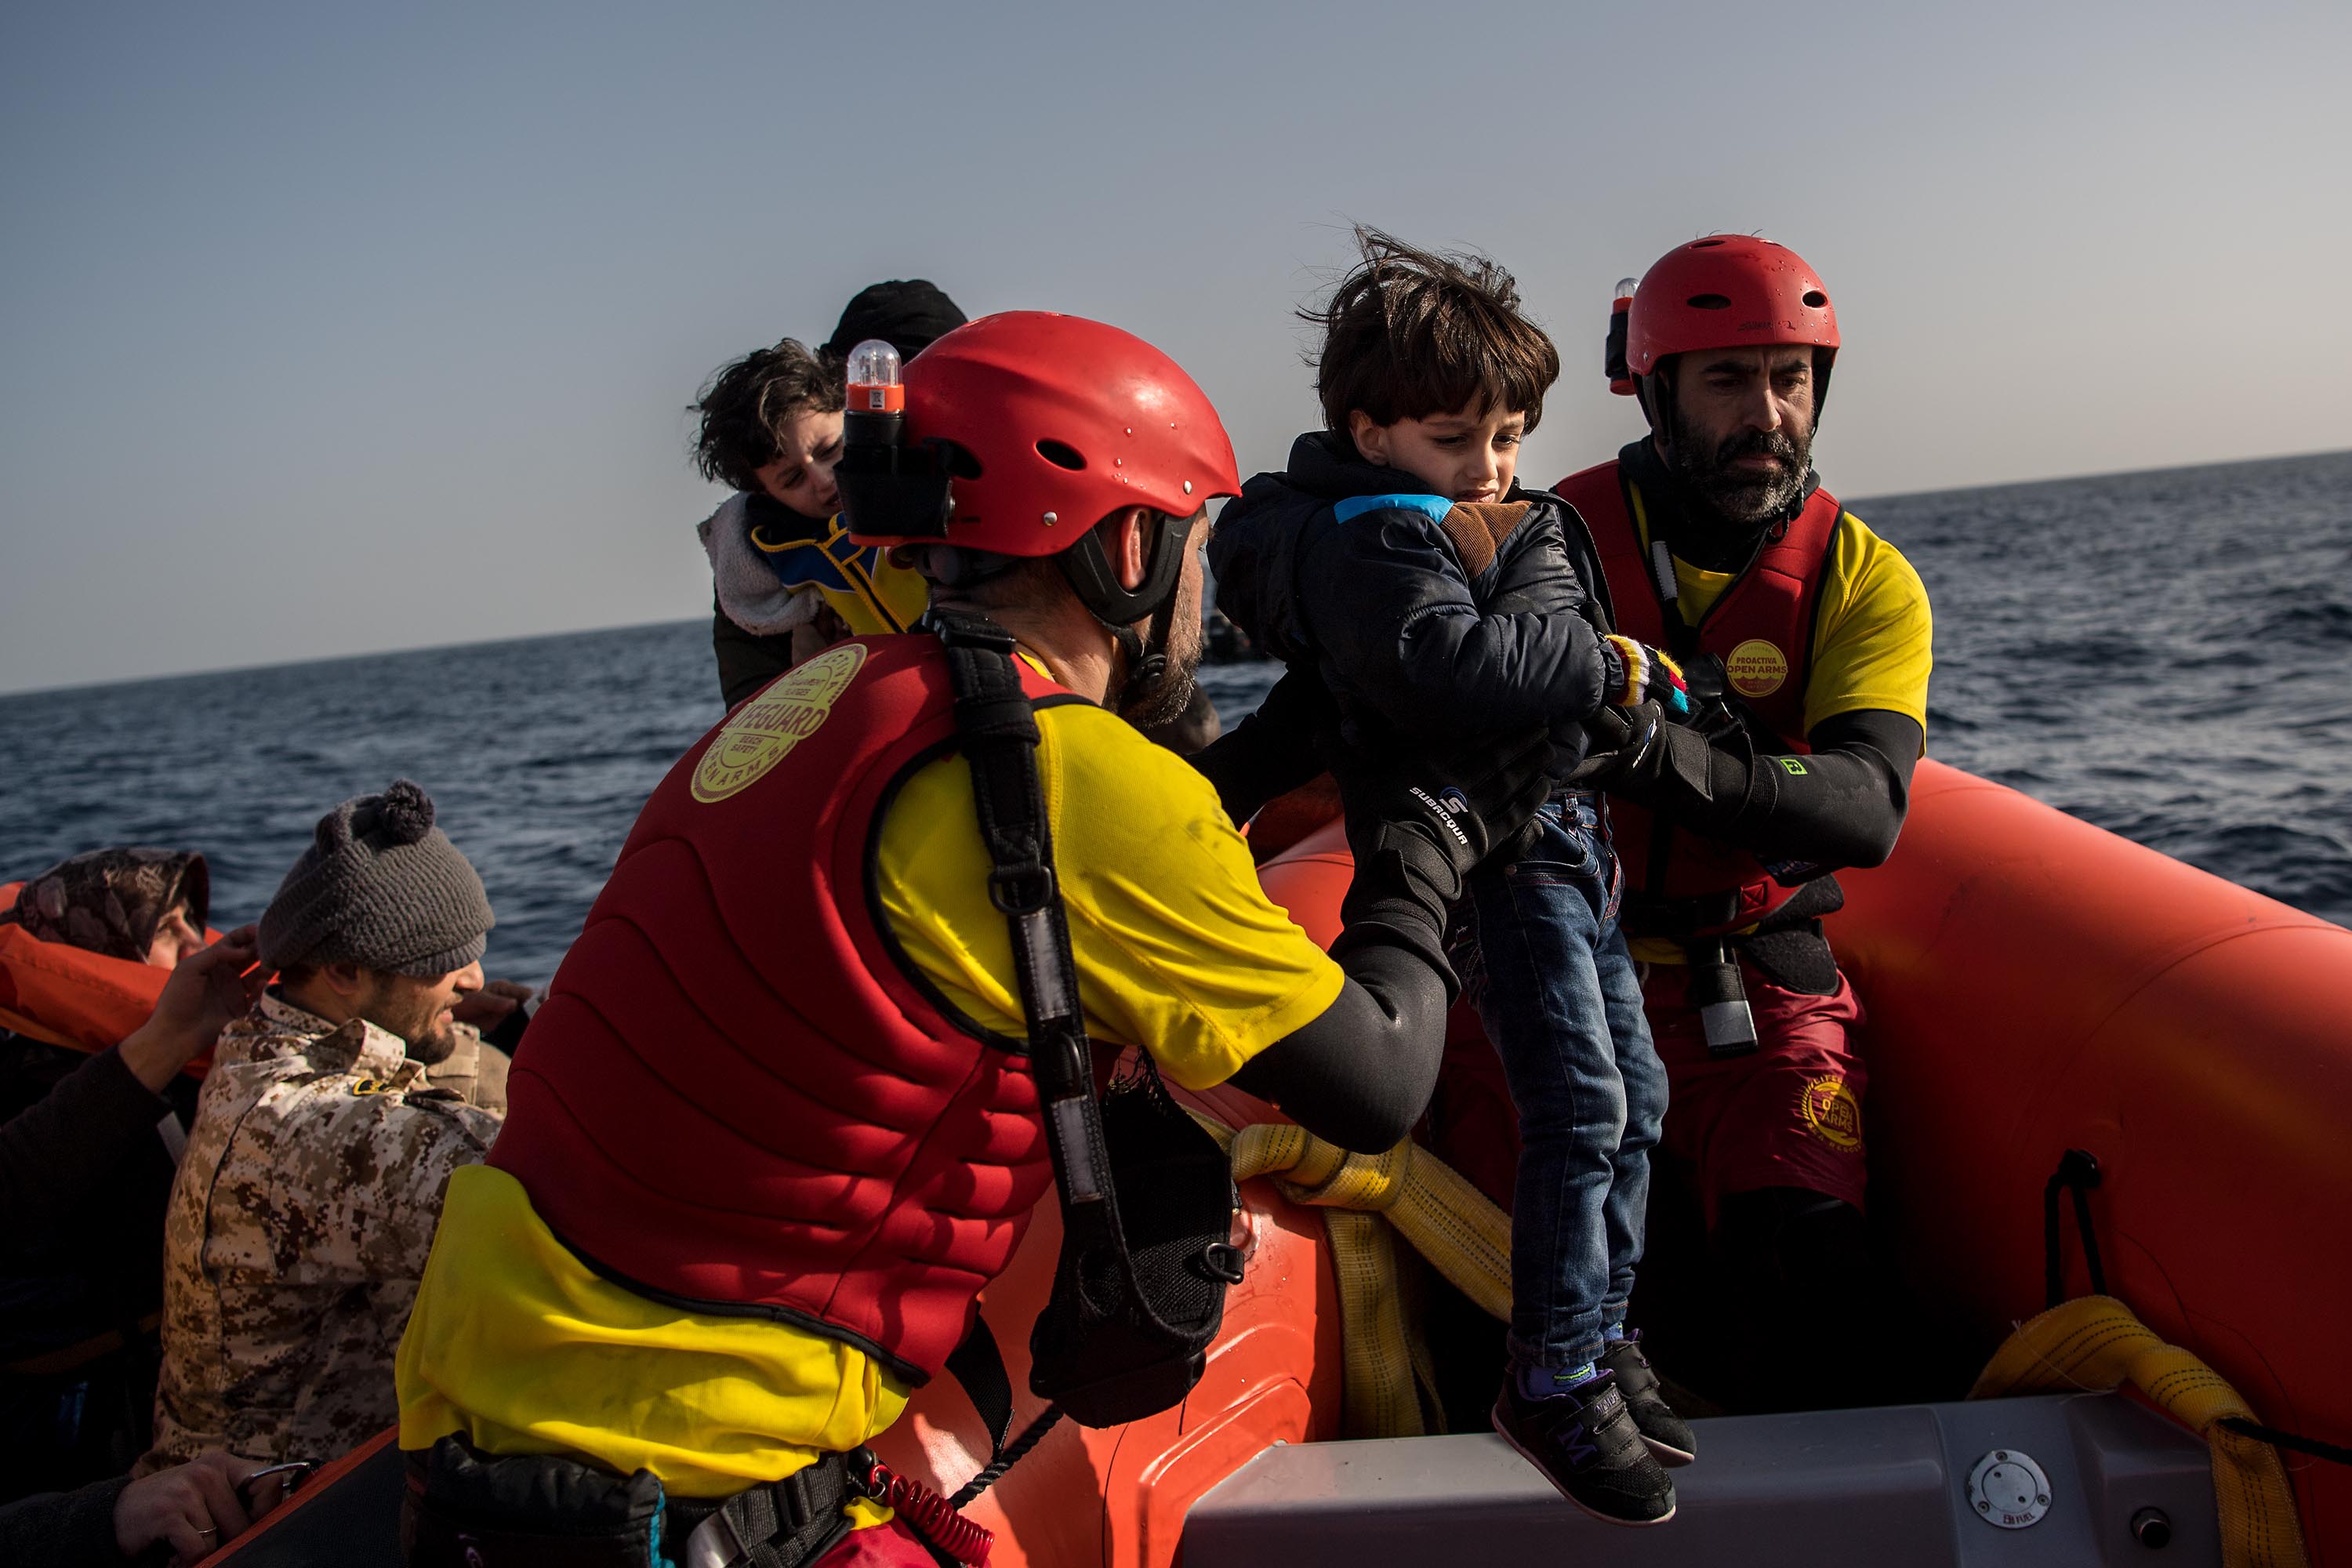 Ahmed Mohamad (L) 1 and his brother Hossia Mohamad, 3, of Syria are assisted by members of the Spanish NGO Proactiva Open Arms  as he and his family are rescued from a wooden boat north of Sabratha, Libya on February 18, 2017. (David Ramos—Getty Images)